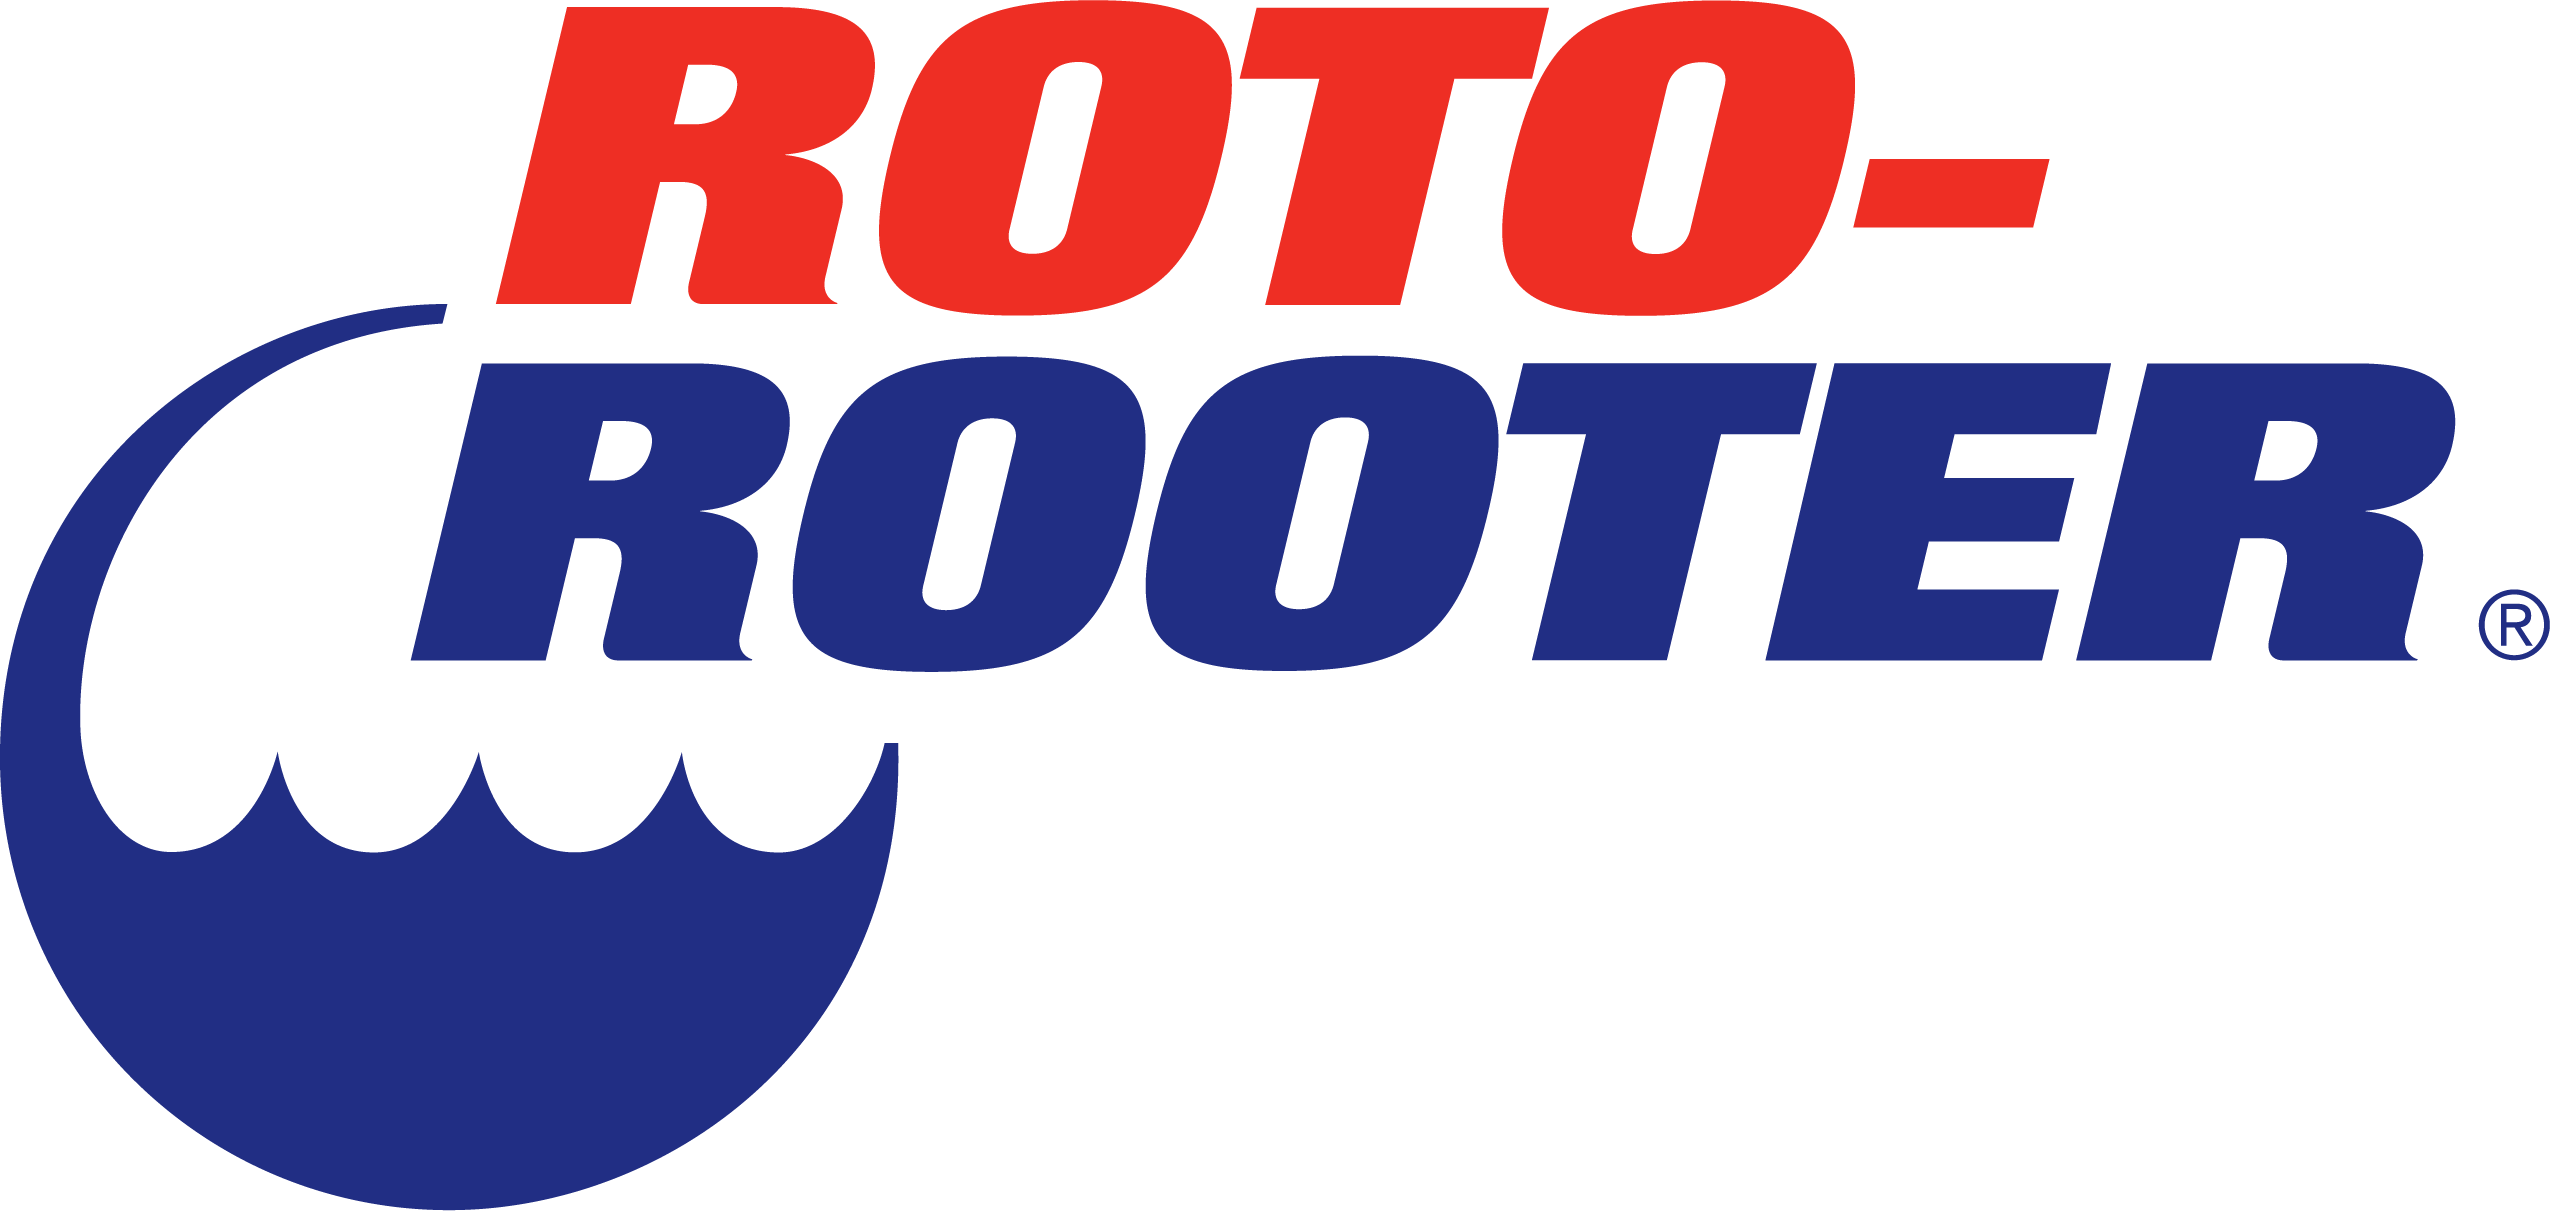 roto-rooter